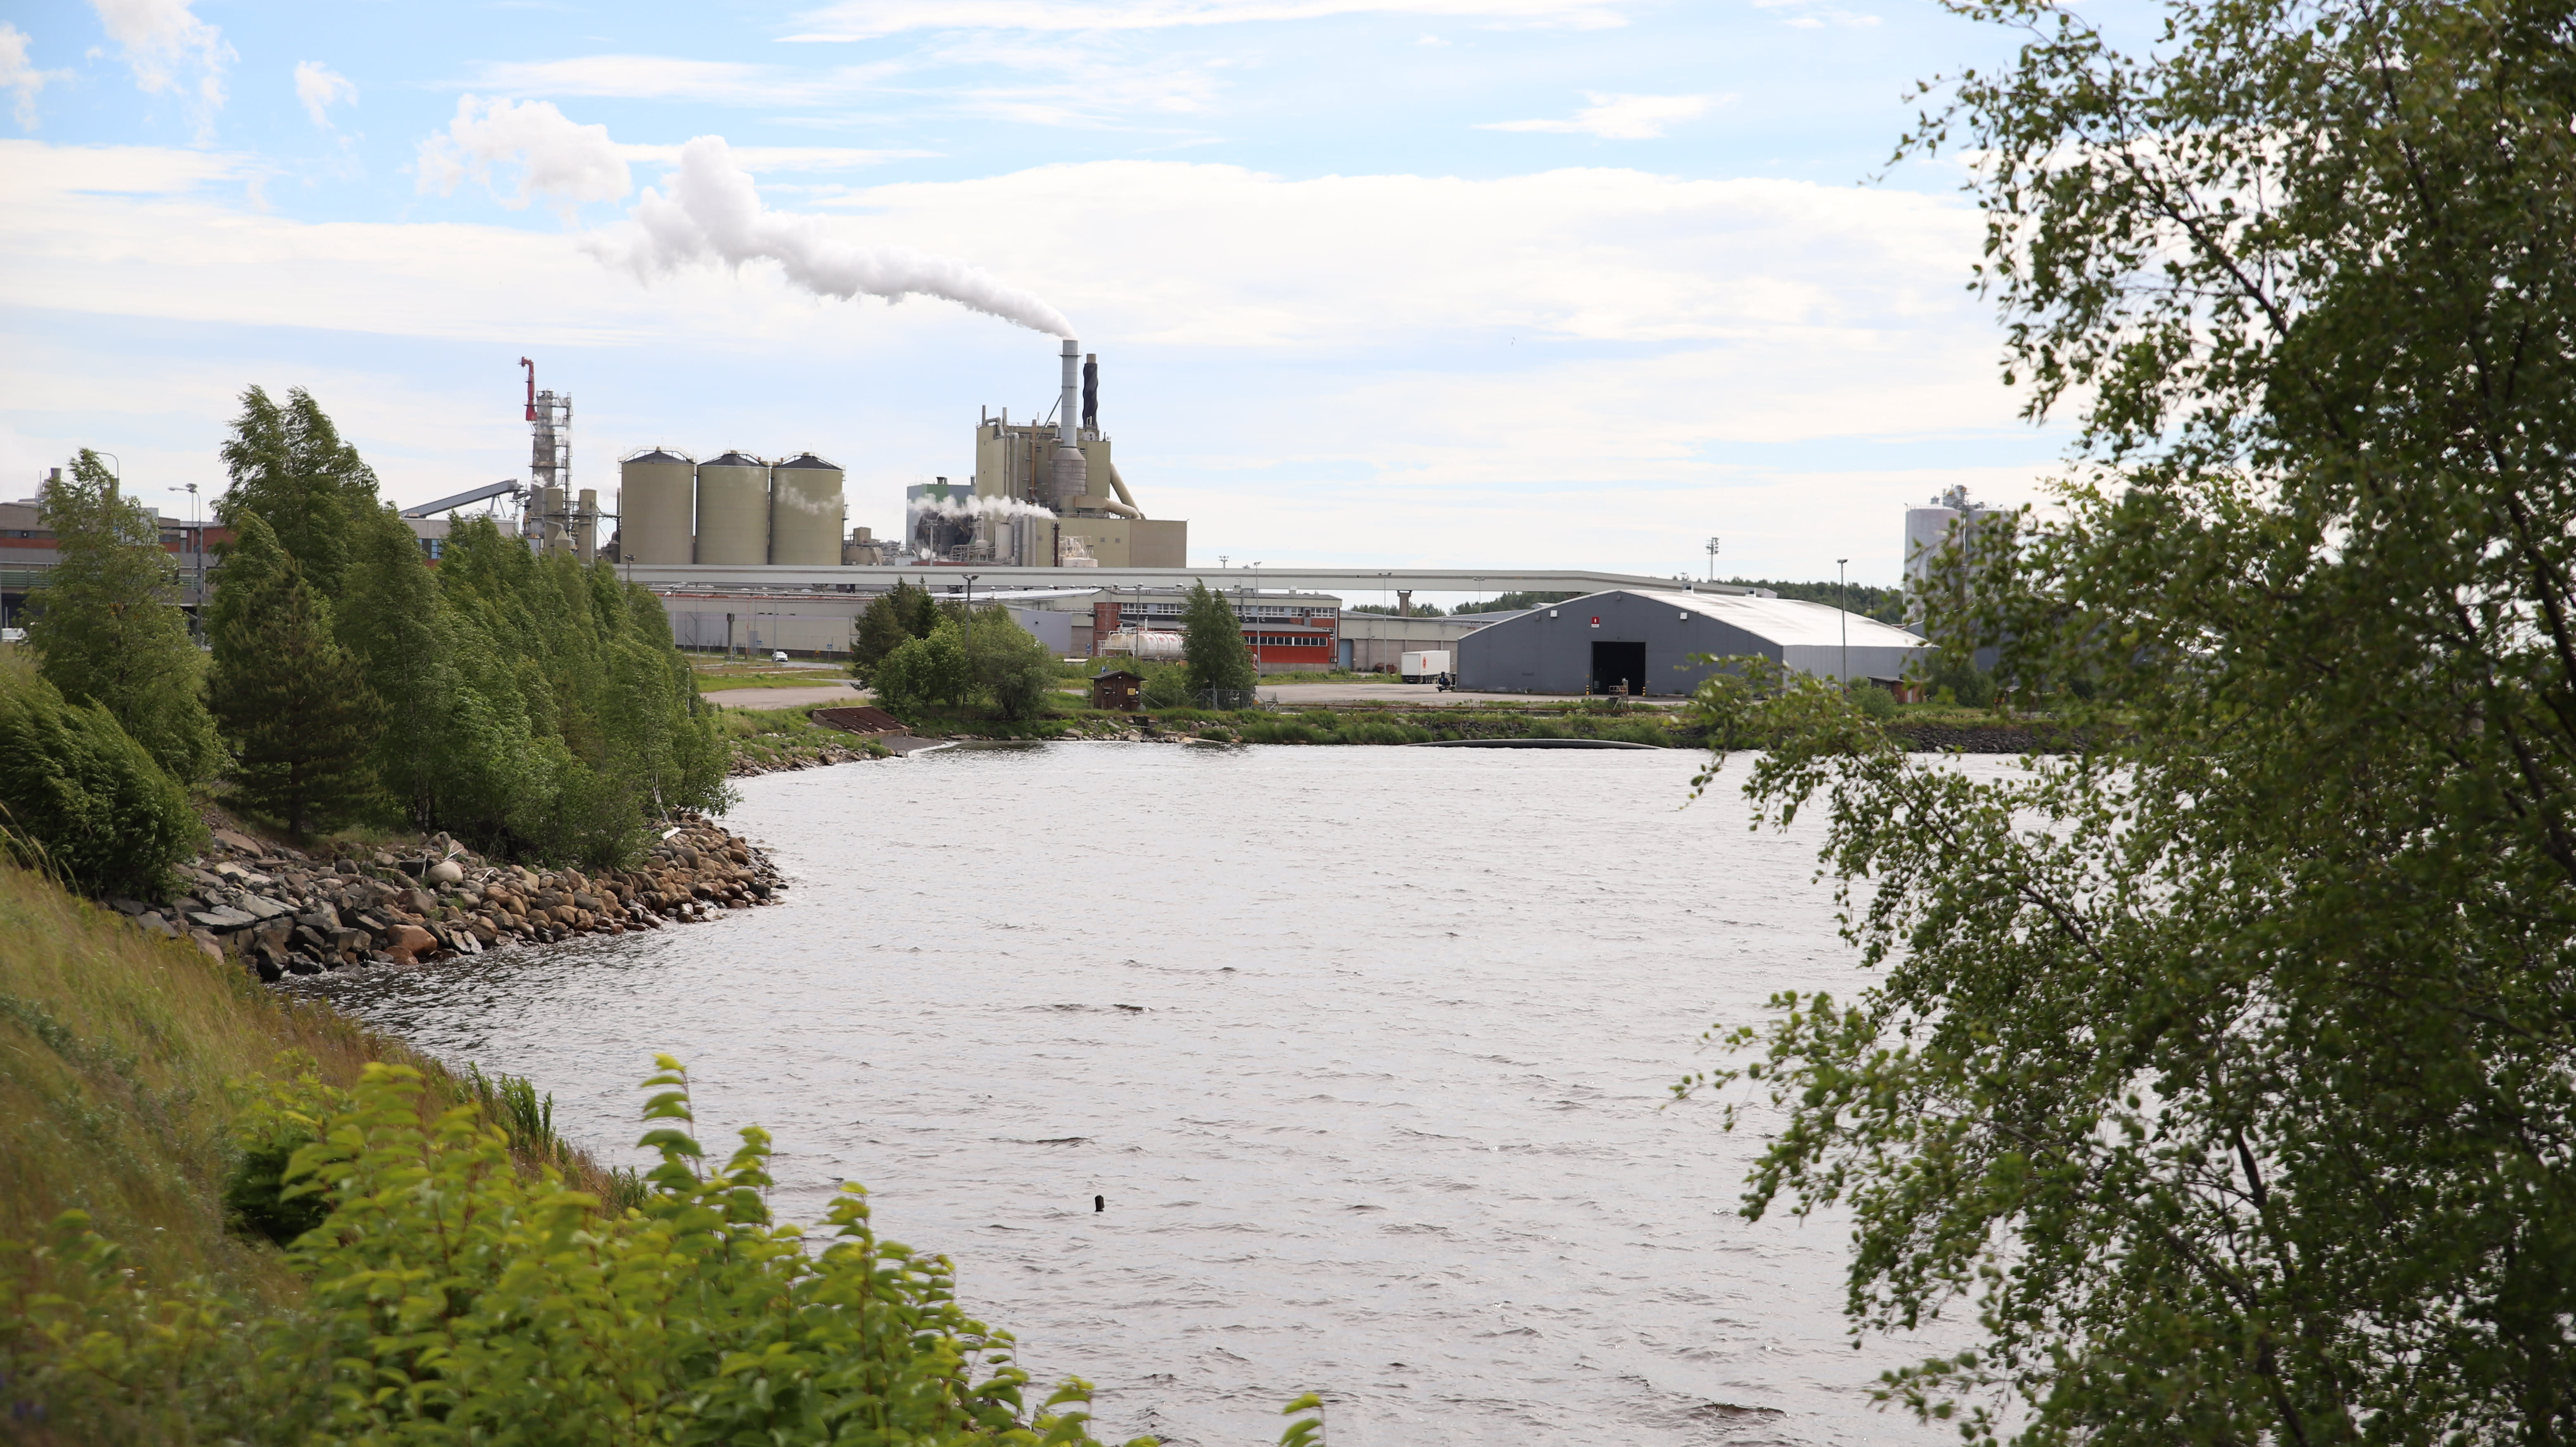 Kemi-Tornio region receives EUR 4.2 million recovery package to handle Veitsiluoto plant closures